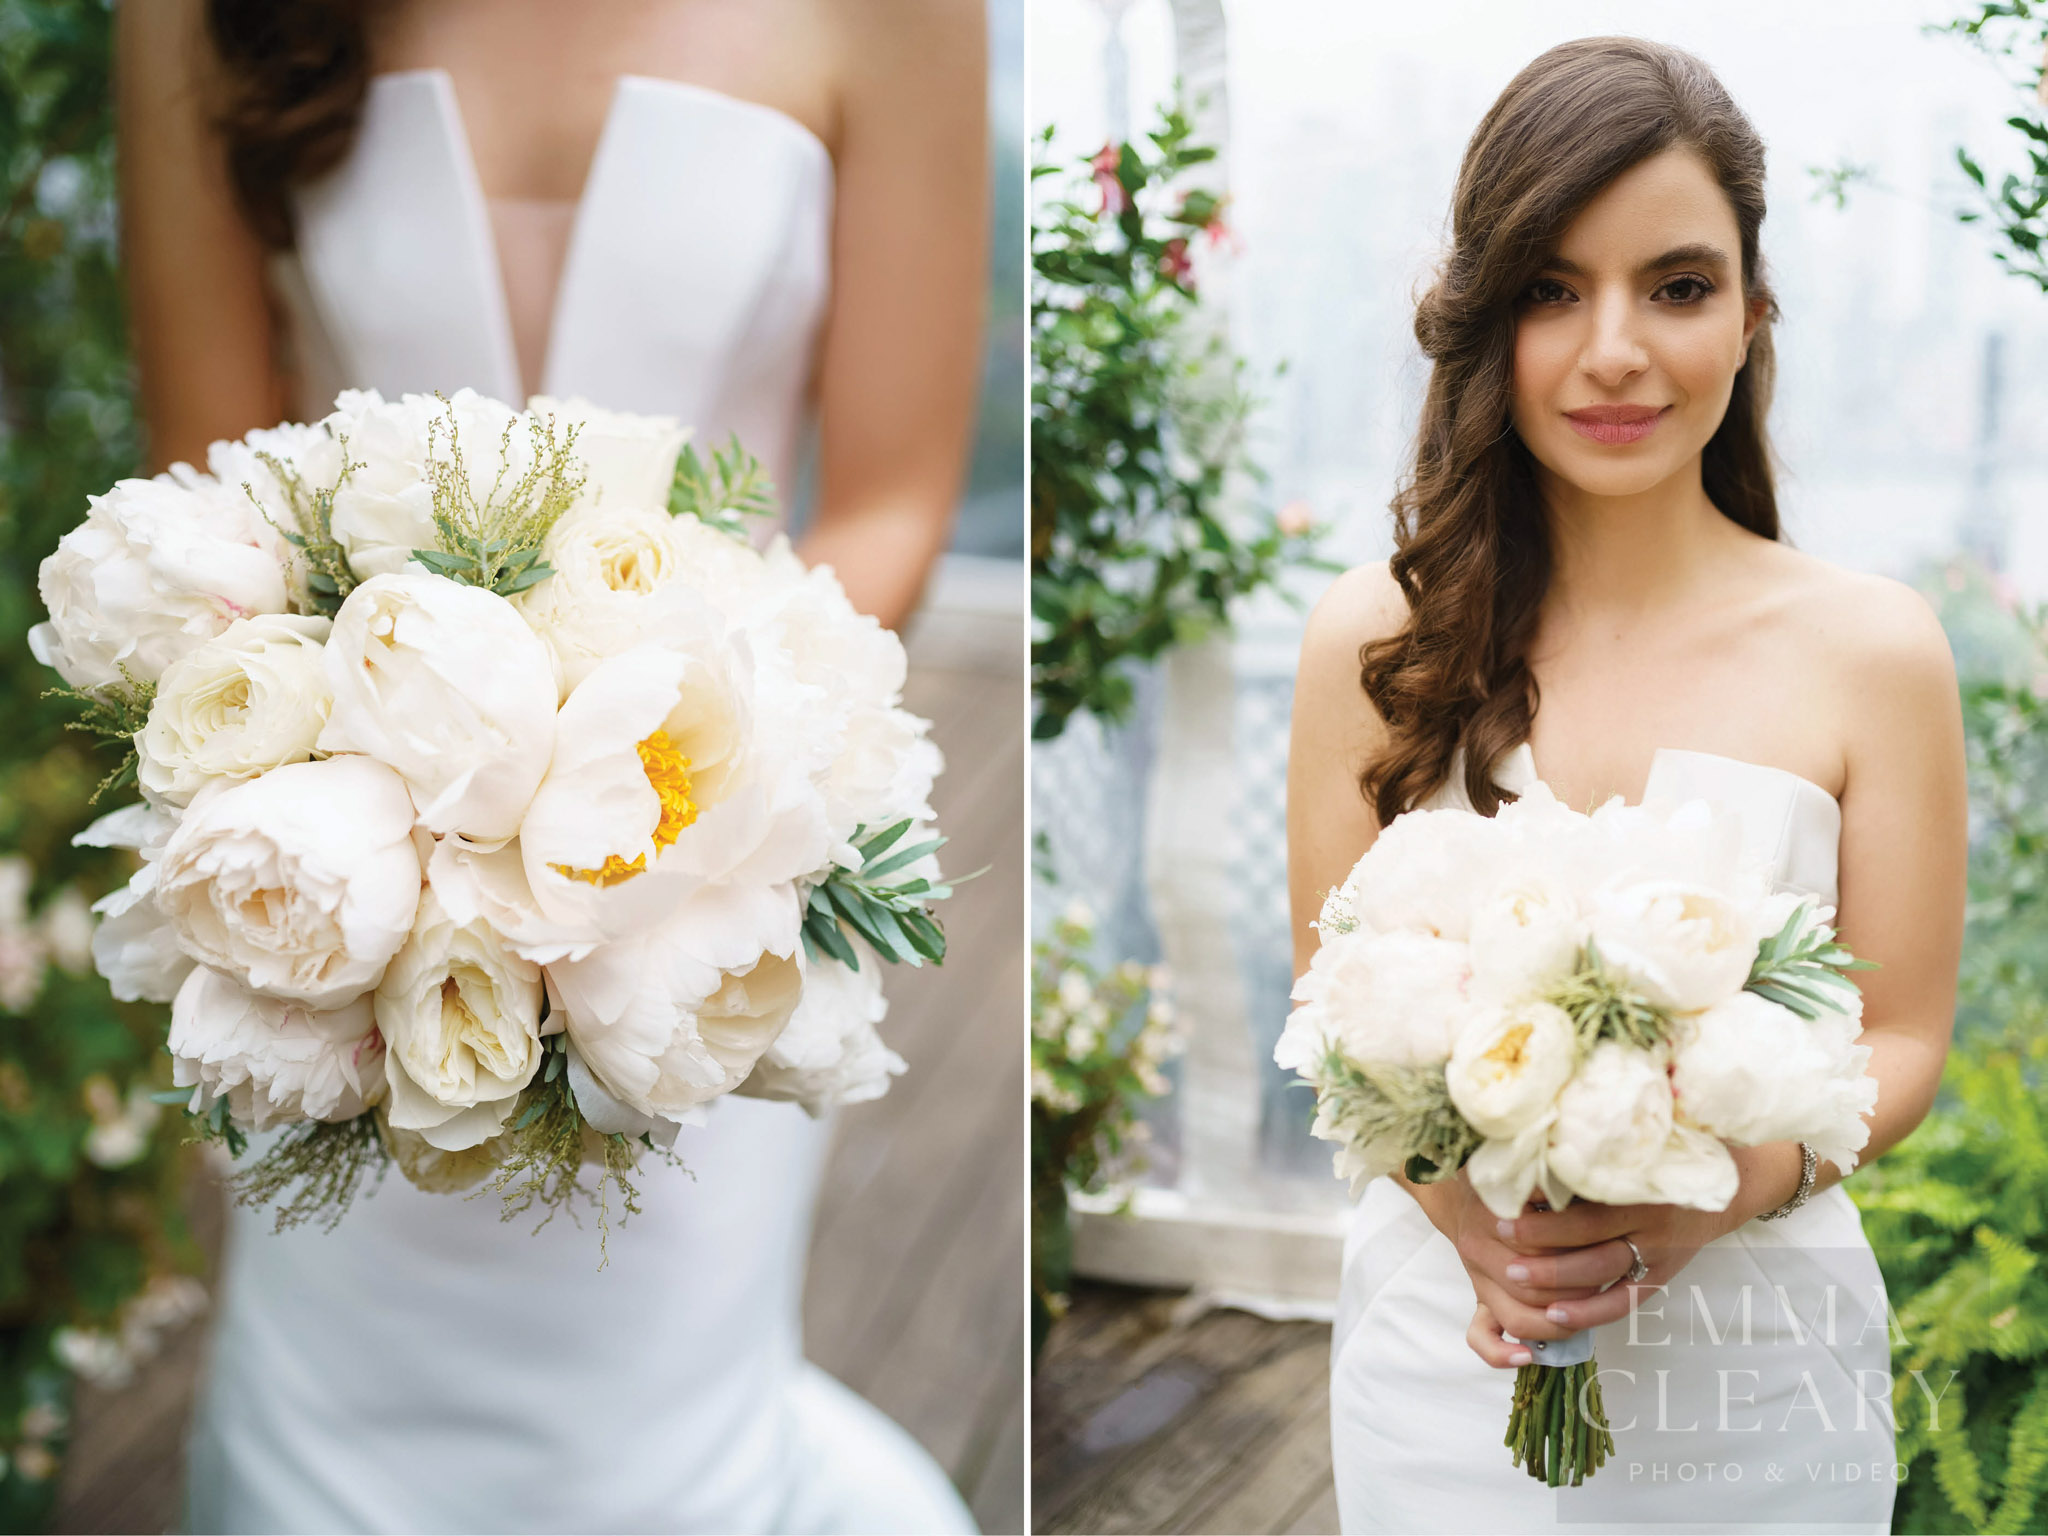 The bride and the wedding bouquet